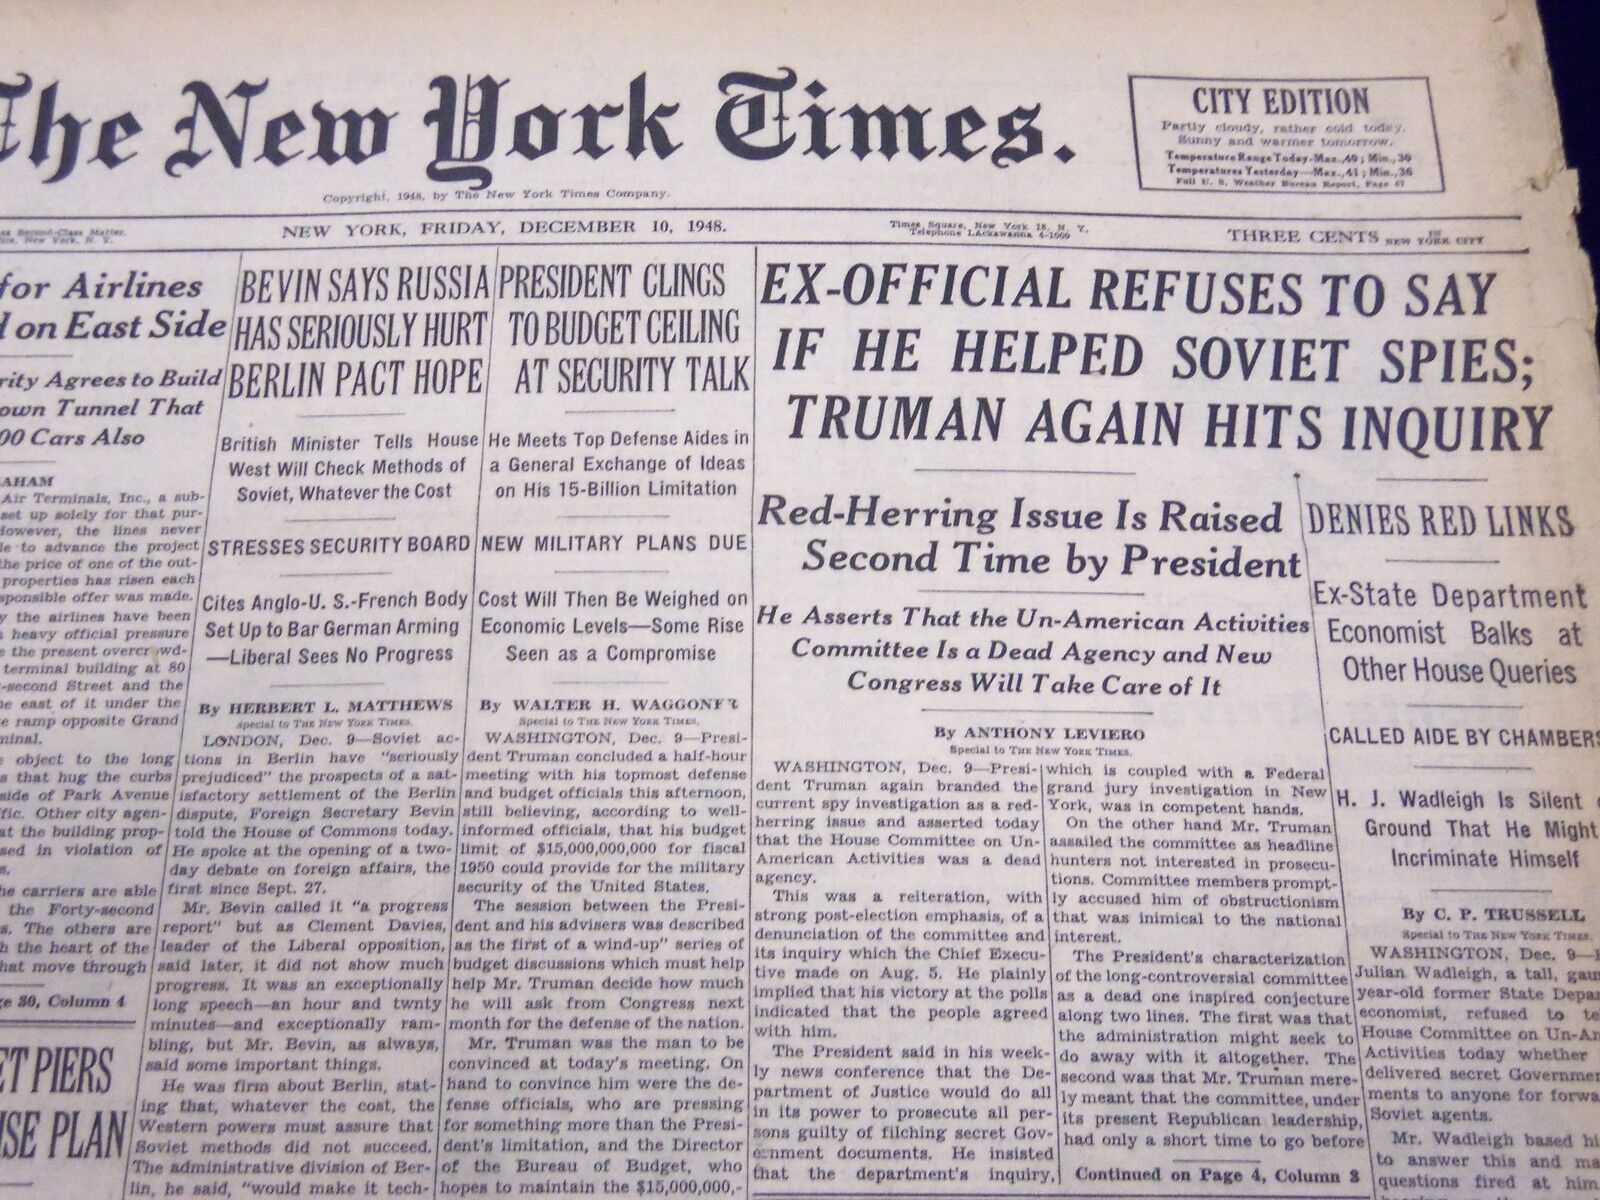 1948 DEC 10 NEW YORK TIMES - EX-OFFICIAL REFUSES TO SAY IF HELPED SPIES - NT 135